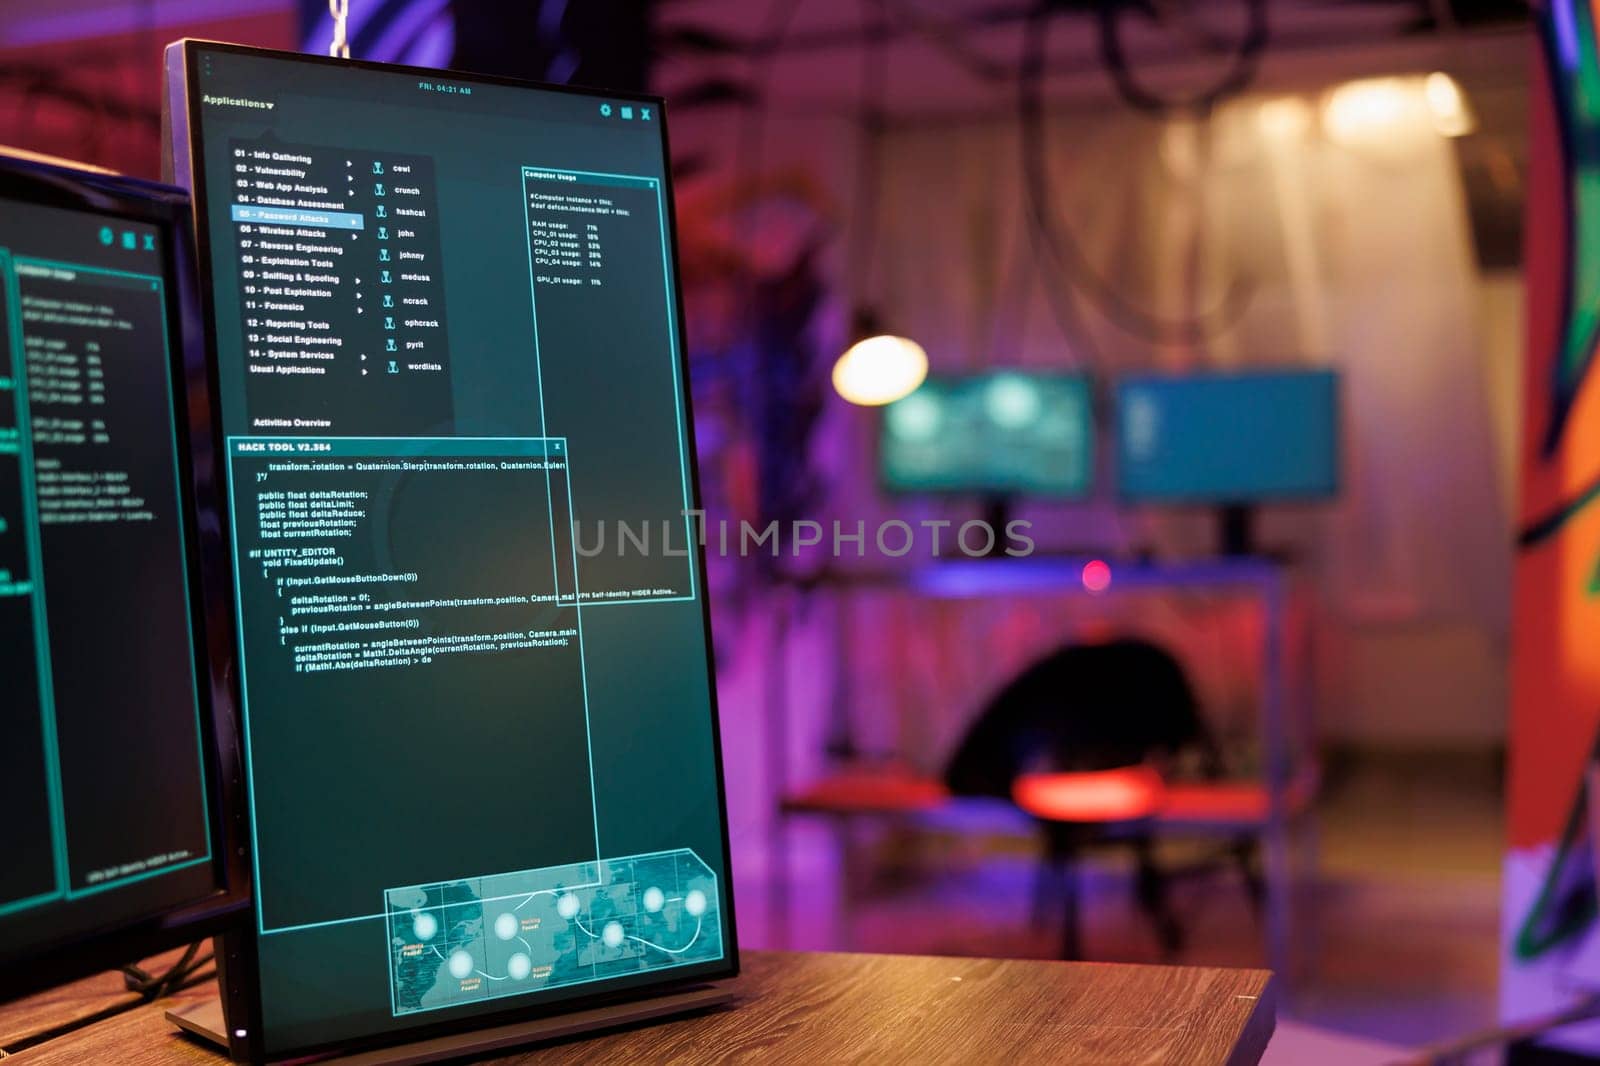 Multiple windows with internet virus software and ransomware running code on computer screens. Server breaking and data breaching malware on monitors in hacker hideout workspace at night time